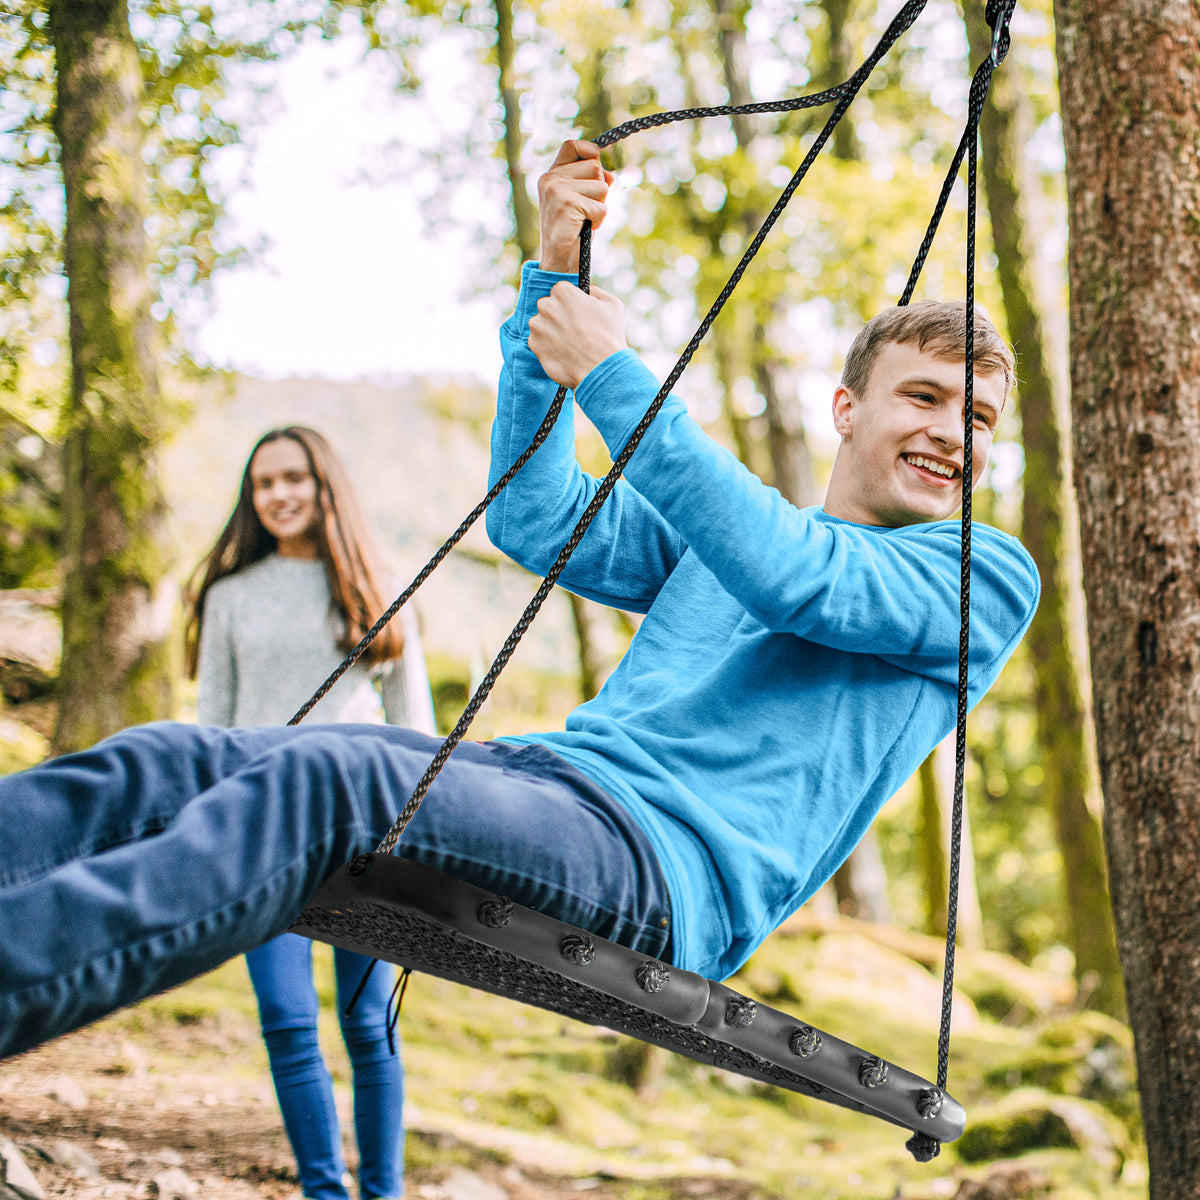 Boy swinging from a tree on the Bliss Outdoors Rectangular Tree Glider with Foam Frame. A girl watches him have fun in the background.